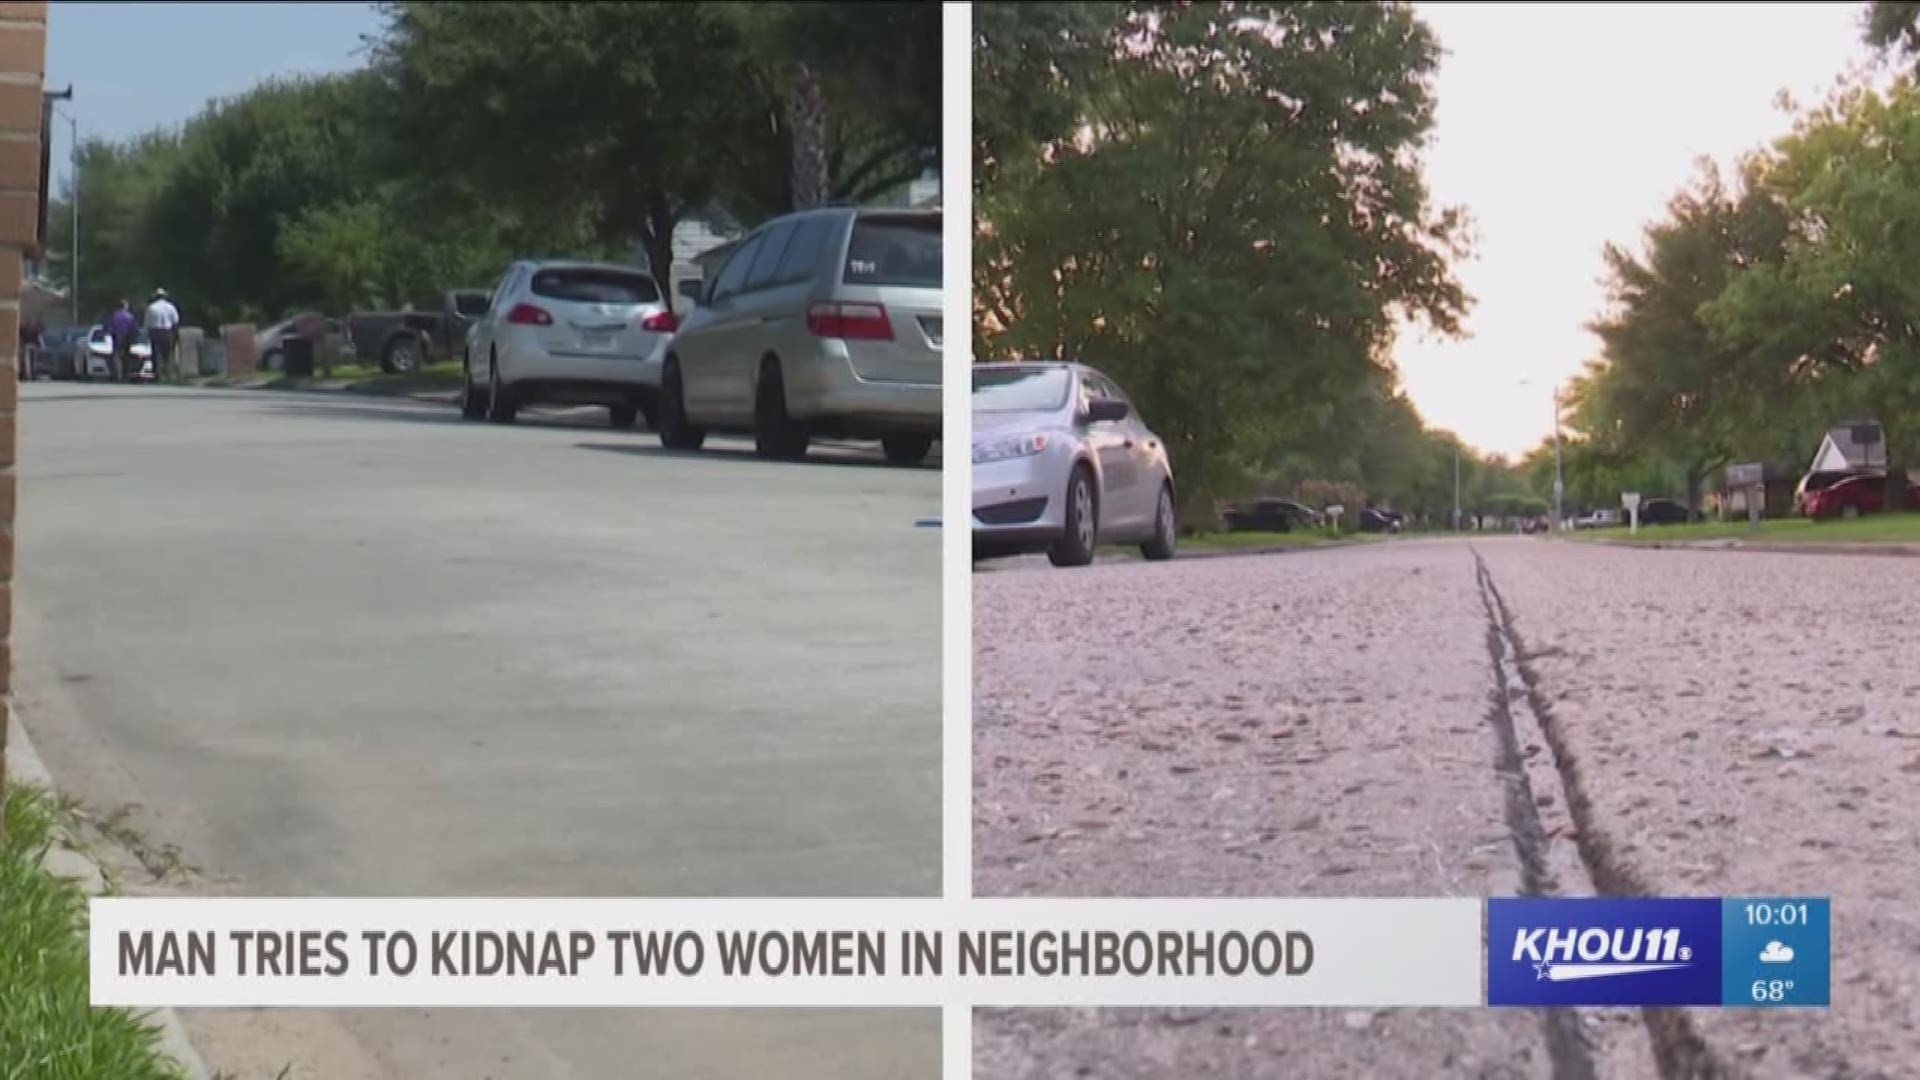 According to sheriff's investigators, a man in his 20s tried to kidnap two women in a north Harris County neighborhood in broad daylight.